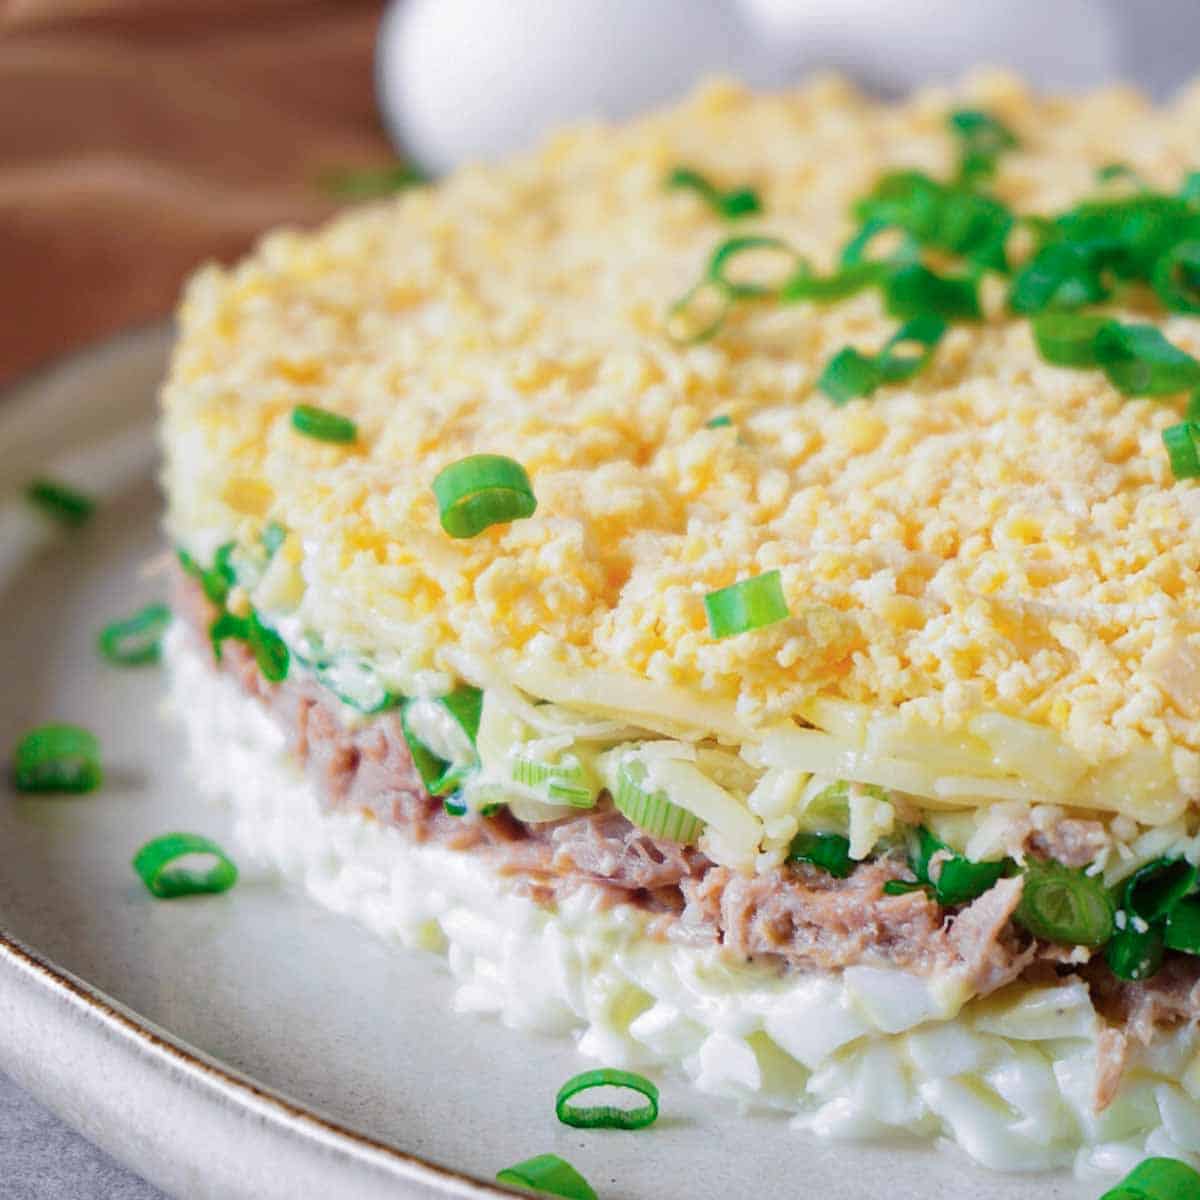 Close up picture of keto tuna egg salad layered as a cake and garnished with chopped green onions.